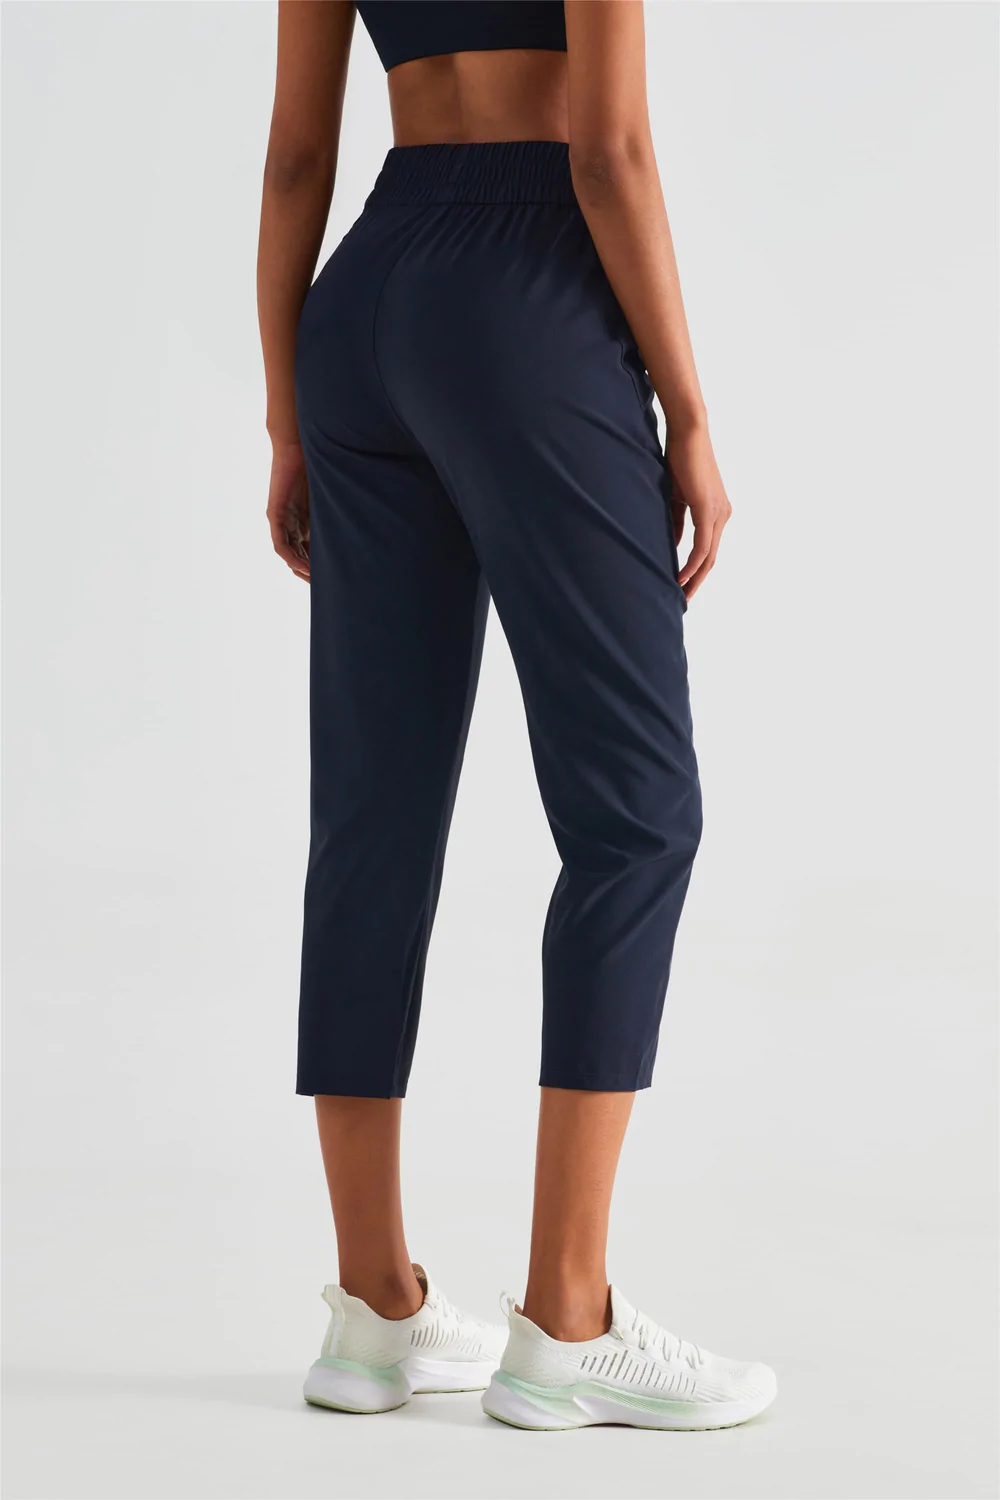 5 Must-Have Features Of Sweatpants For Women – Gymwearmovement